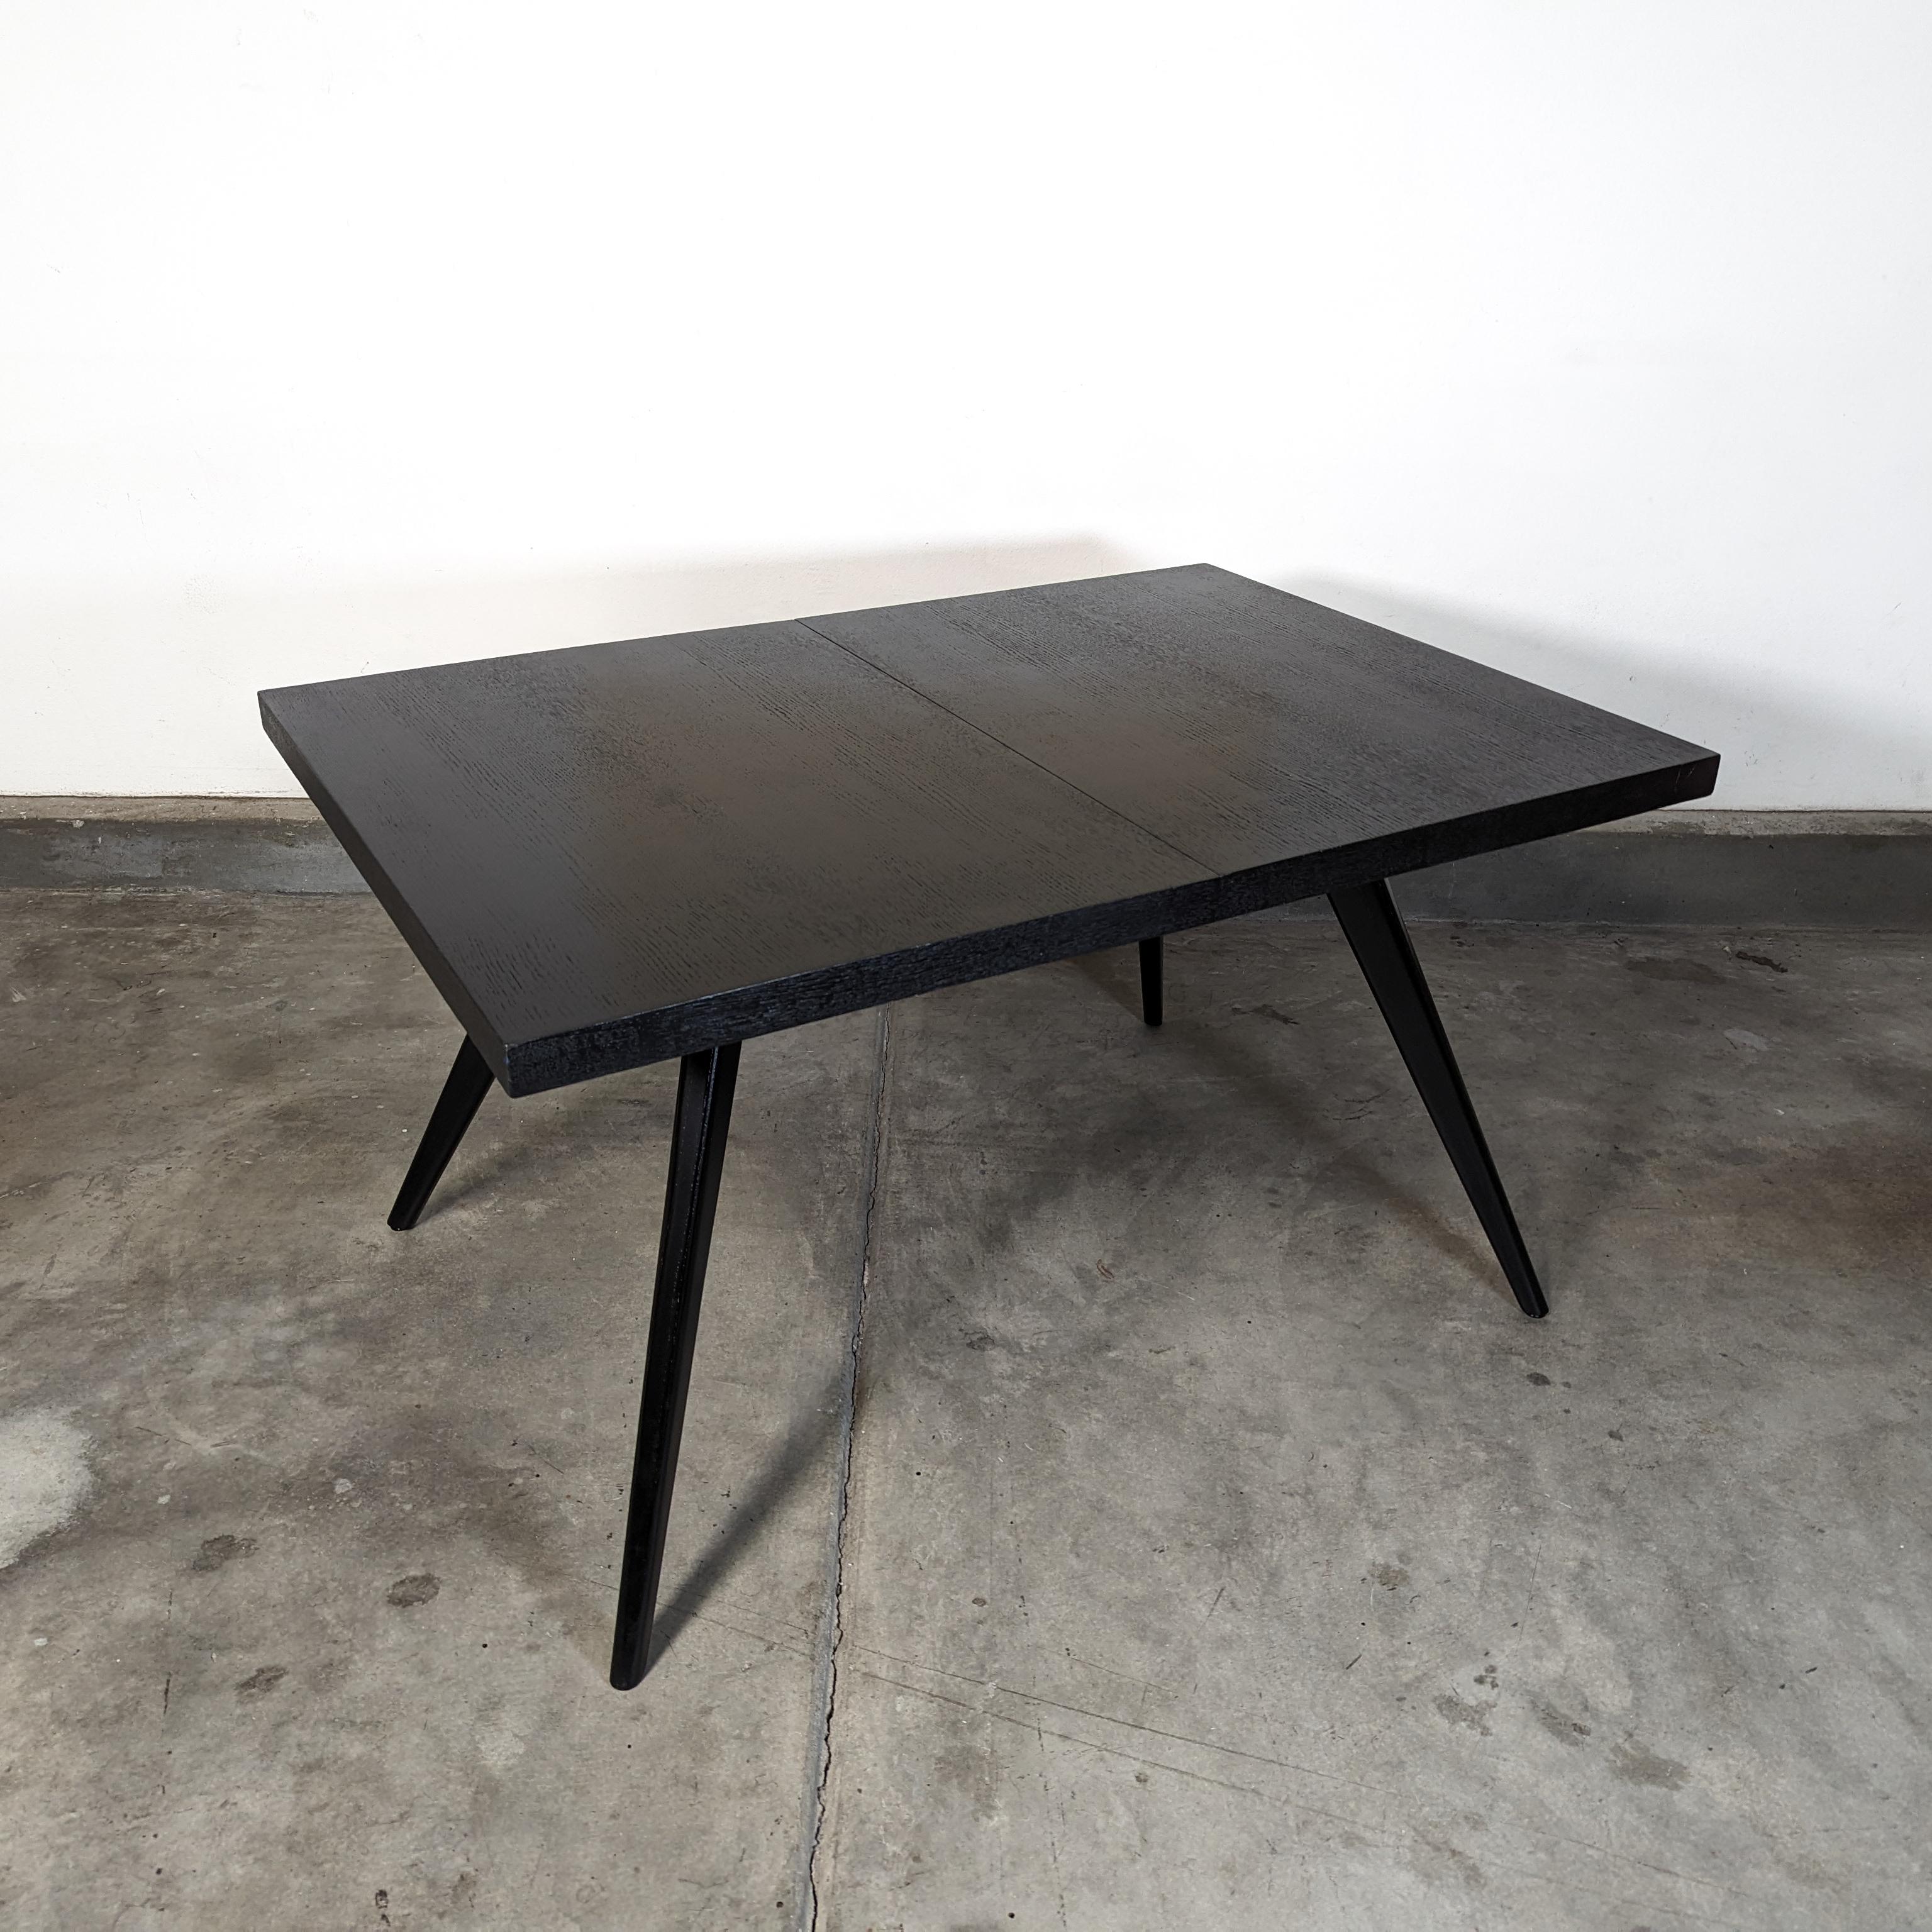 Introducing an immaculate piece of history with this vintage Mid-Century Modern ebonized dining table from the 1950s. A testament to the era's design ethos, this table is a stunning addition to any dining space. It boasts long, gracefully cambered